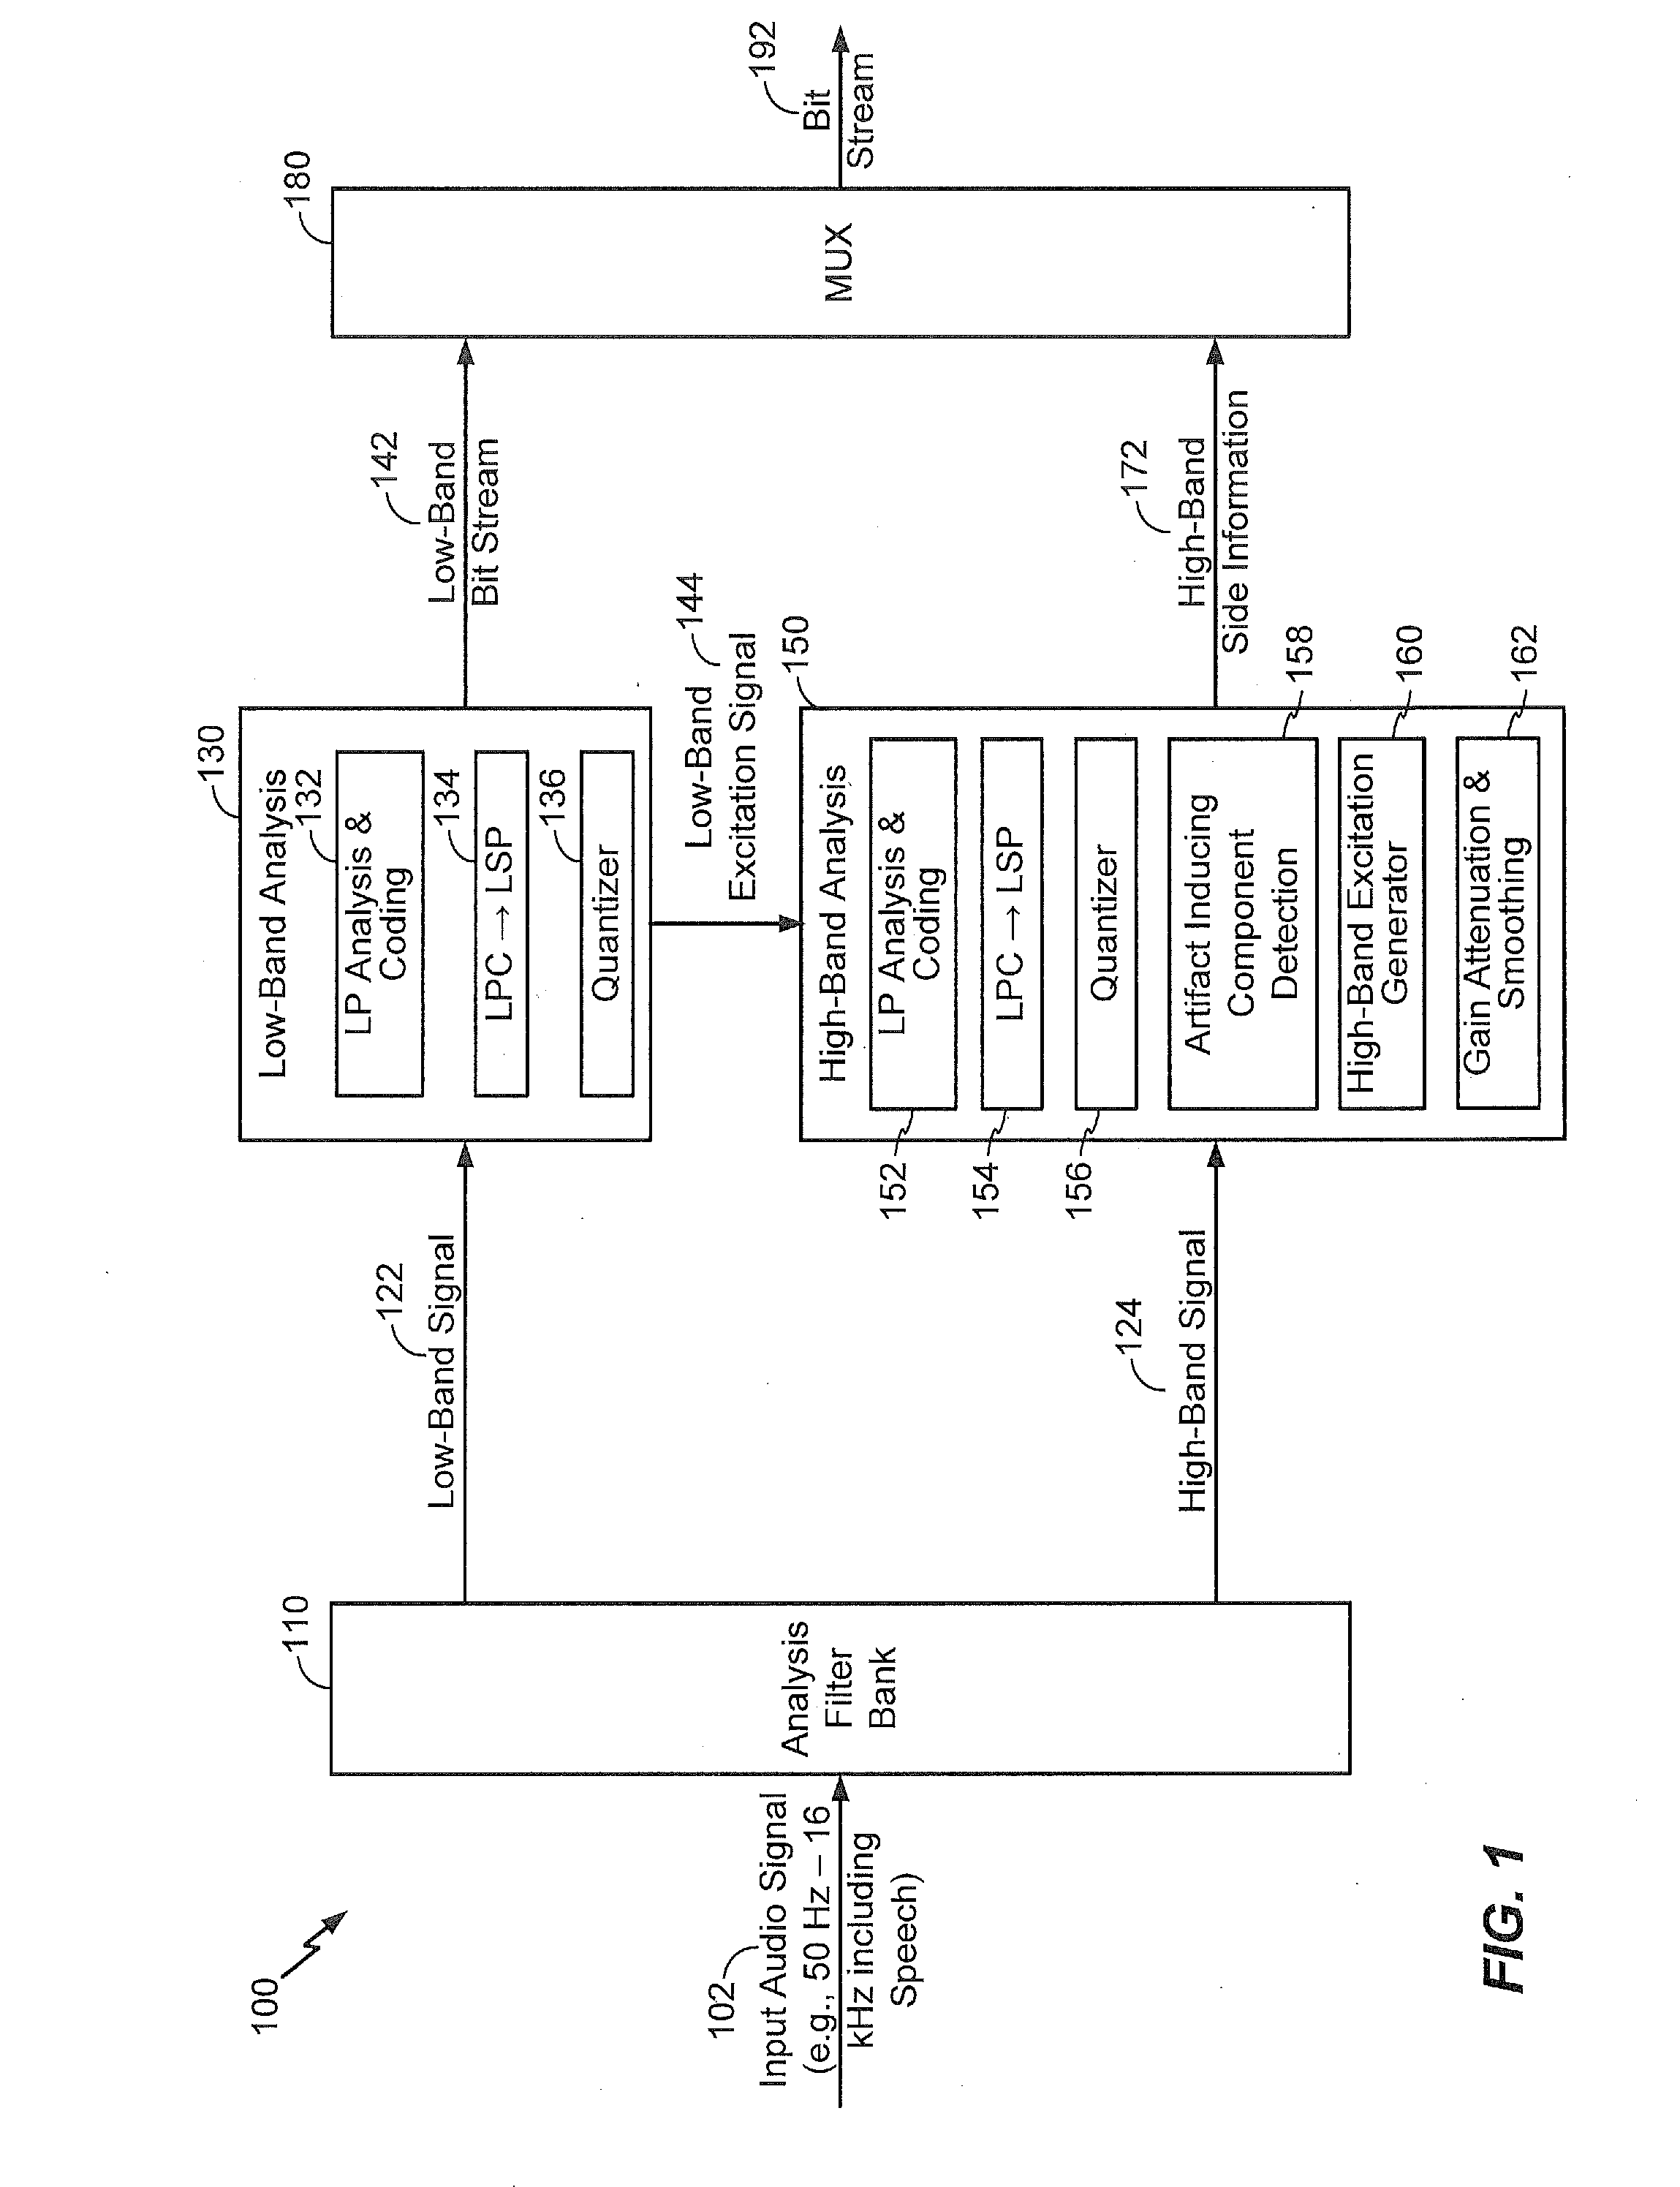 Systems and Methods of Performing Gain Control